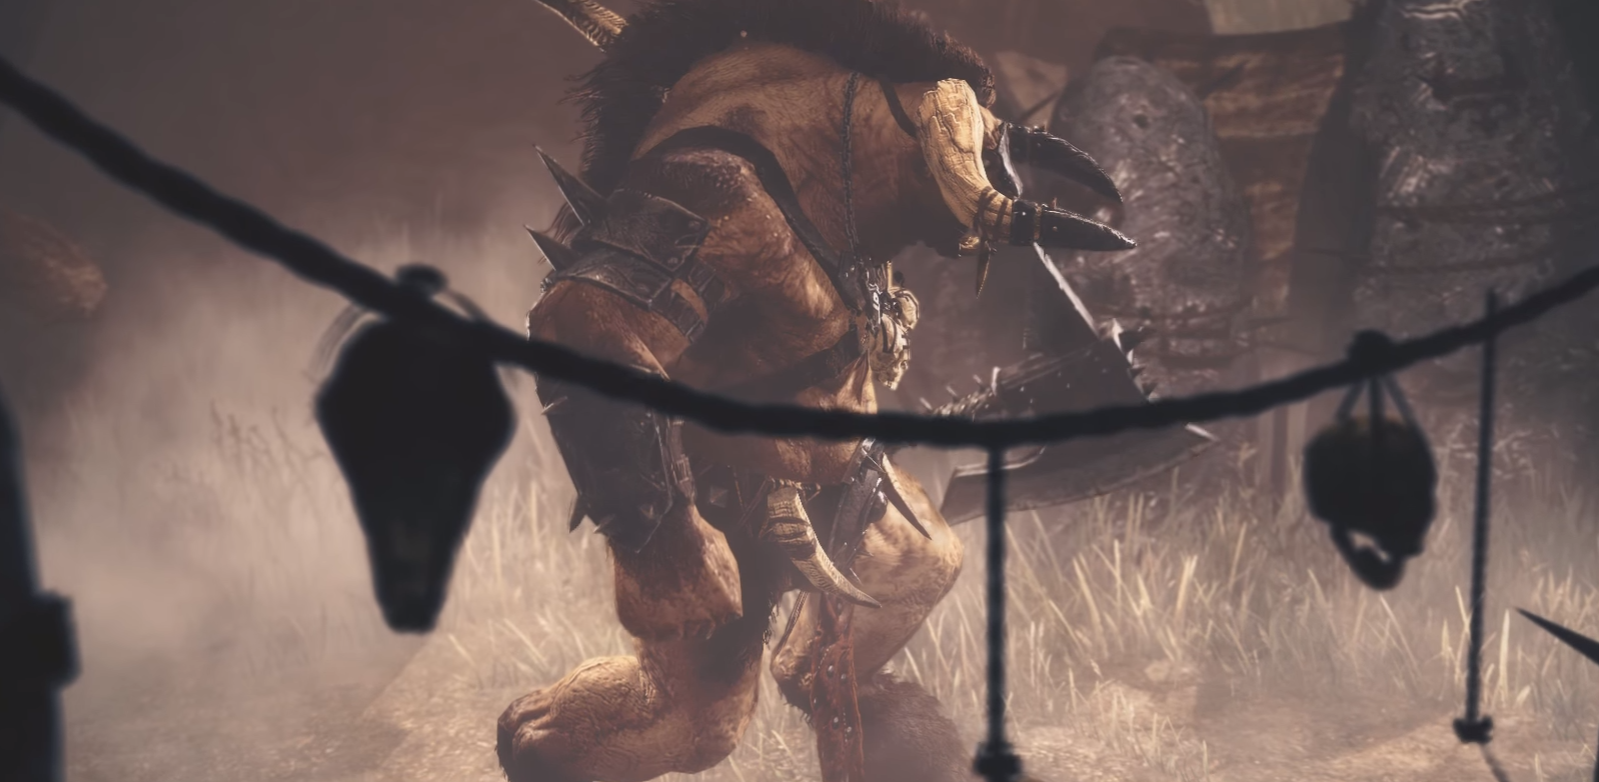 Image for Total War: Warhammer - Call of the Beastmen video introduces Minotaur units